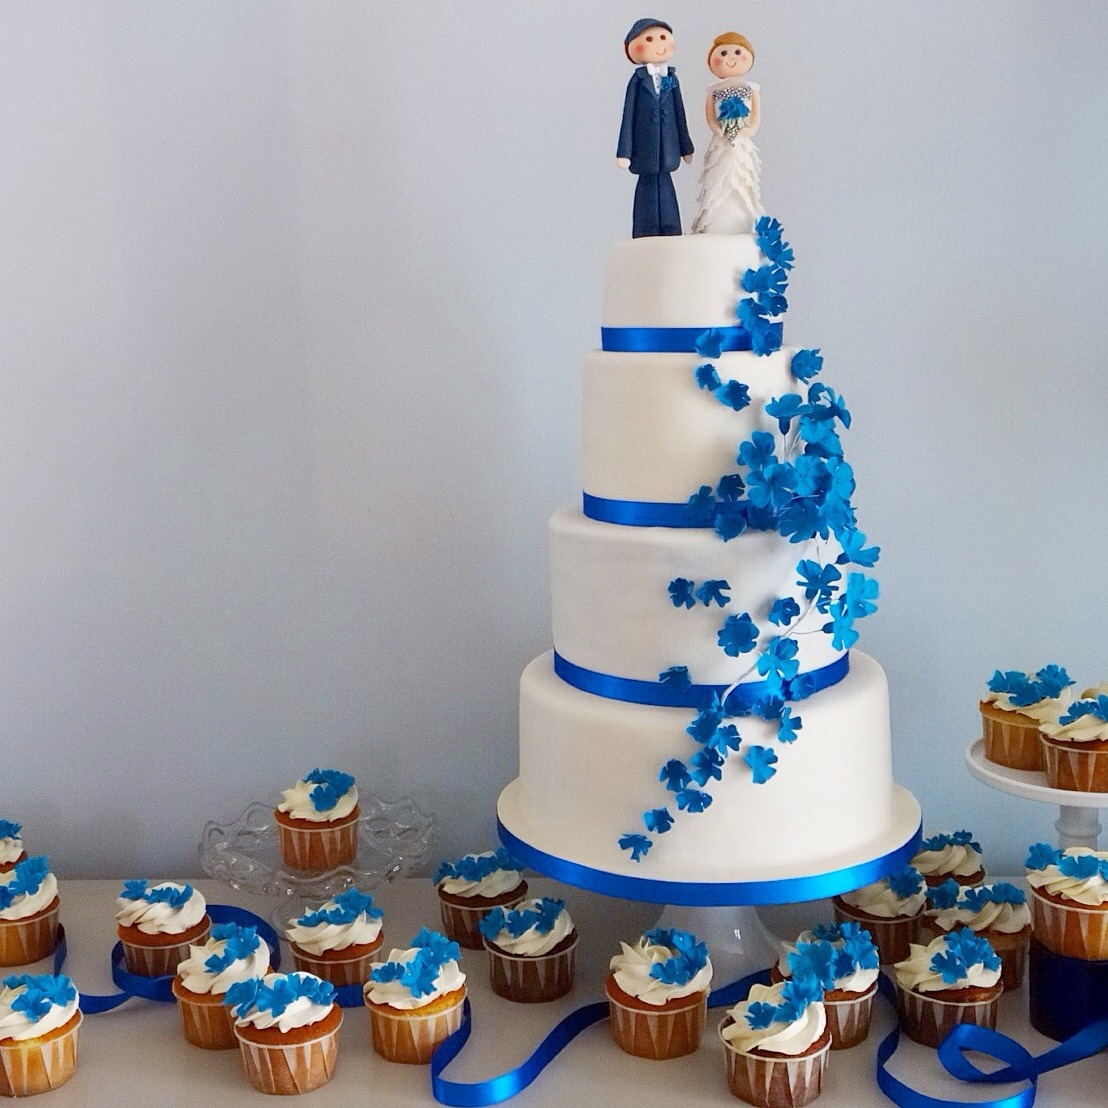 Cake Gallery: Blue Cupcakes | Romantic Moments Wedding Cakes: Custom Cake  Designs for your Perfect Day!